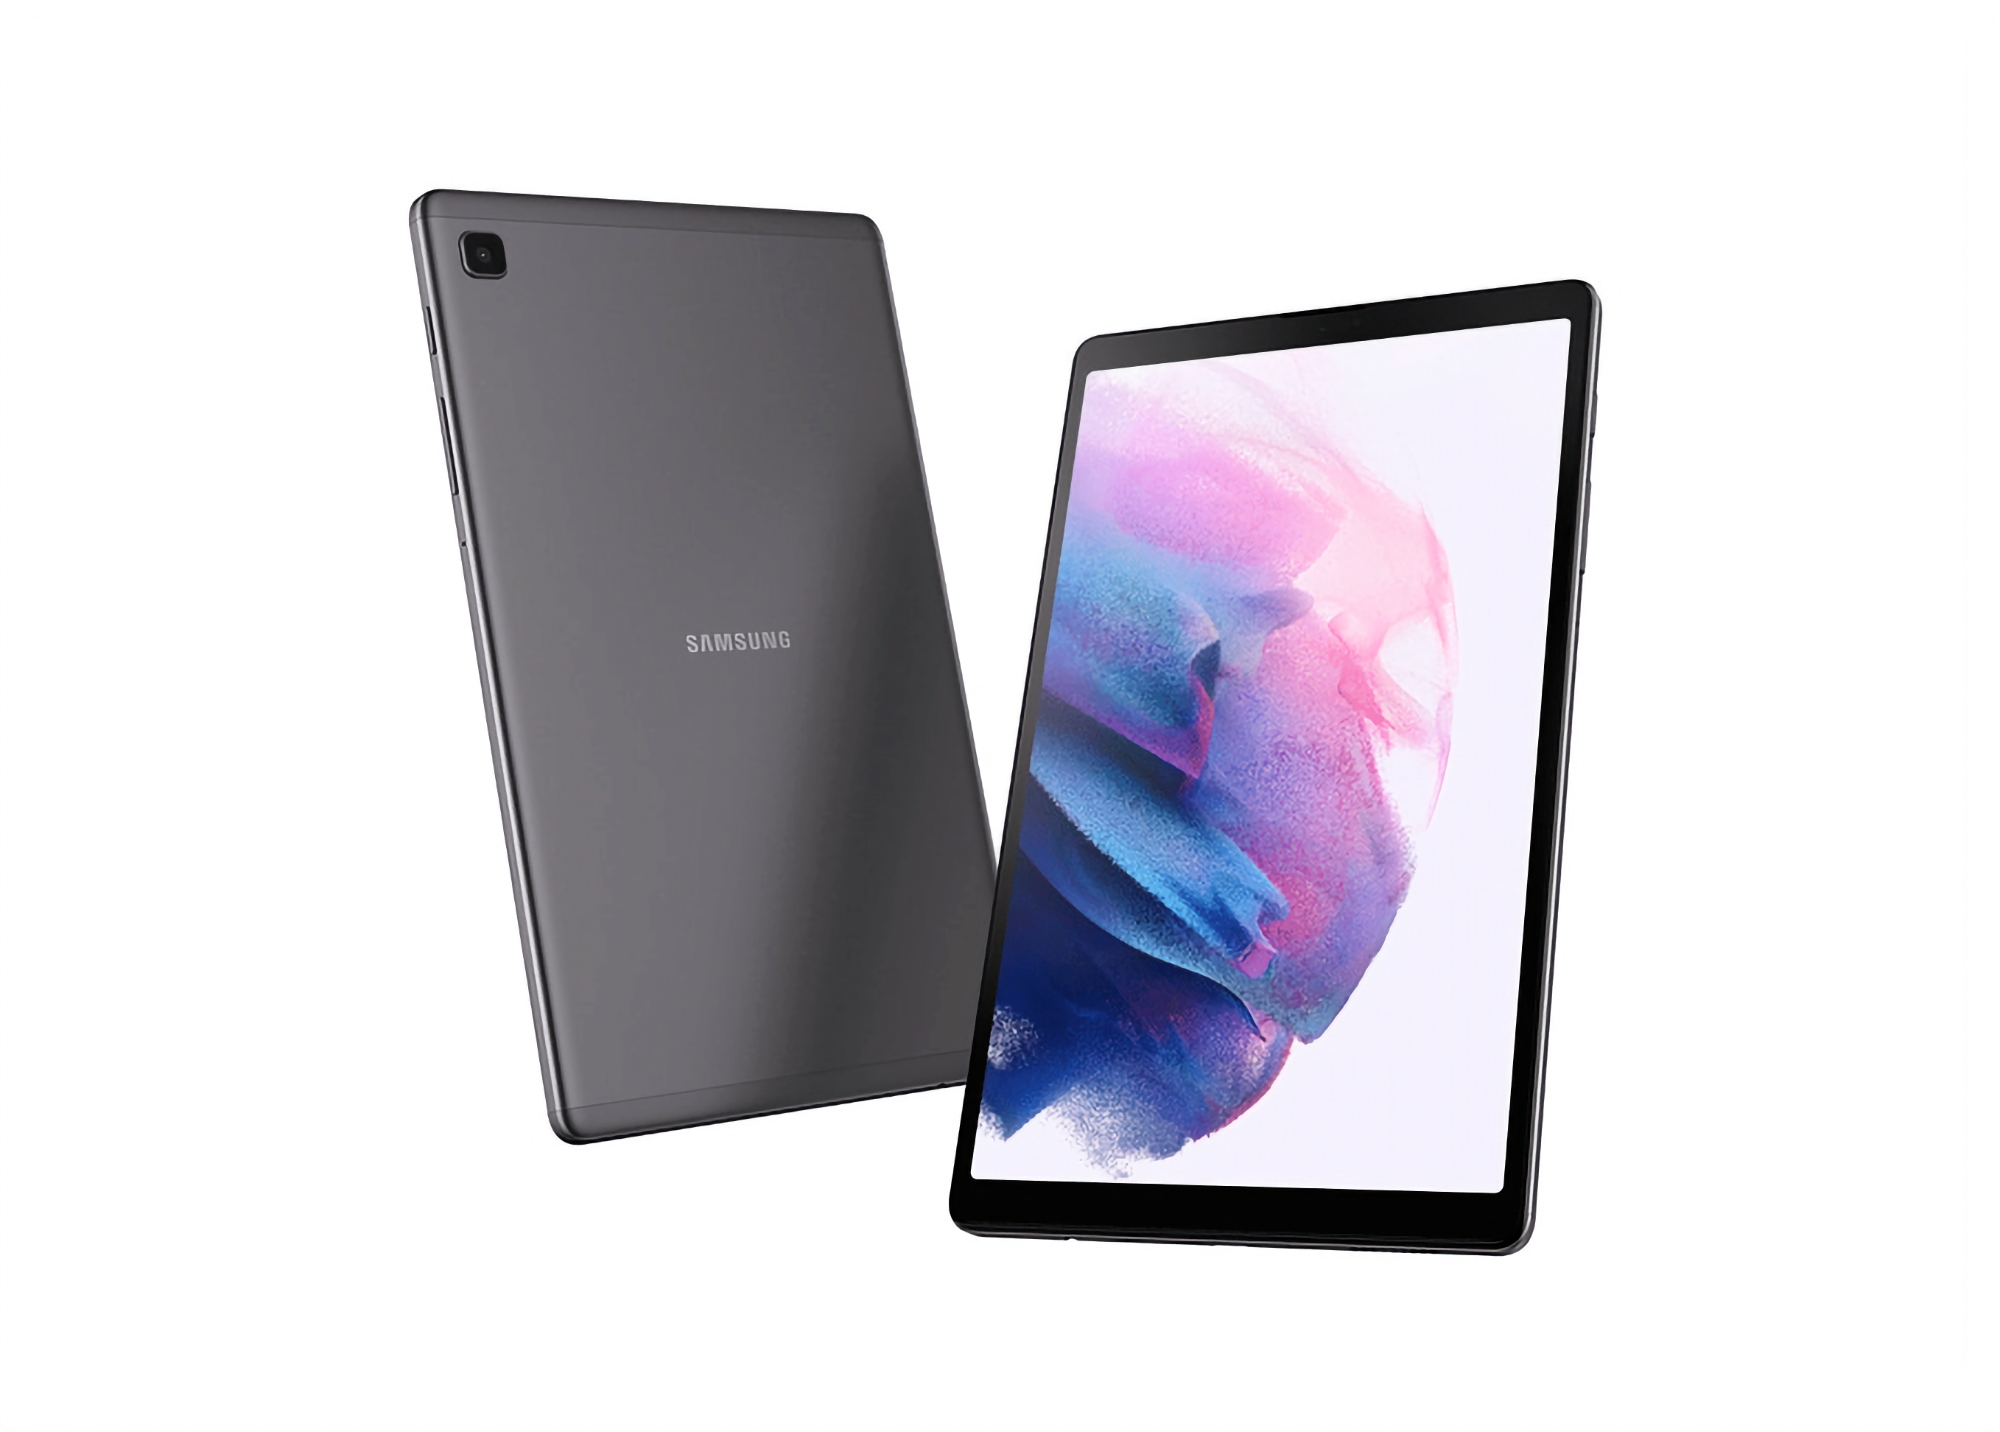 Samsung started updating budget tablet Galaxy Tab A7 Lite to